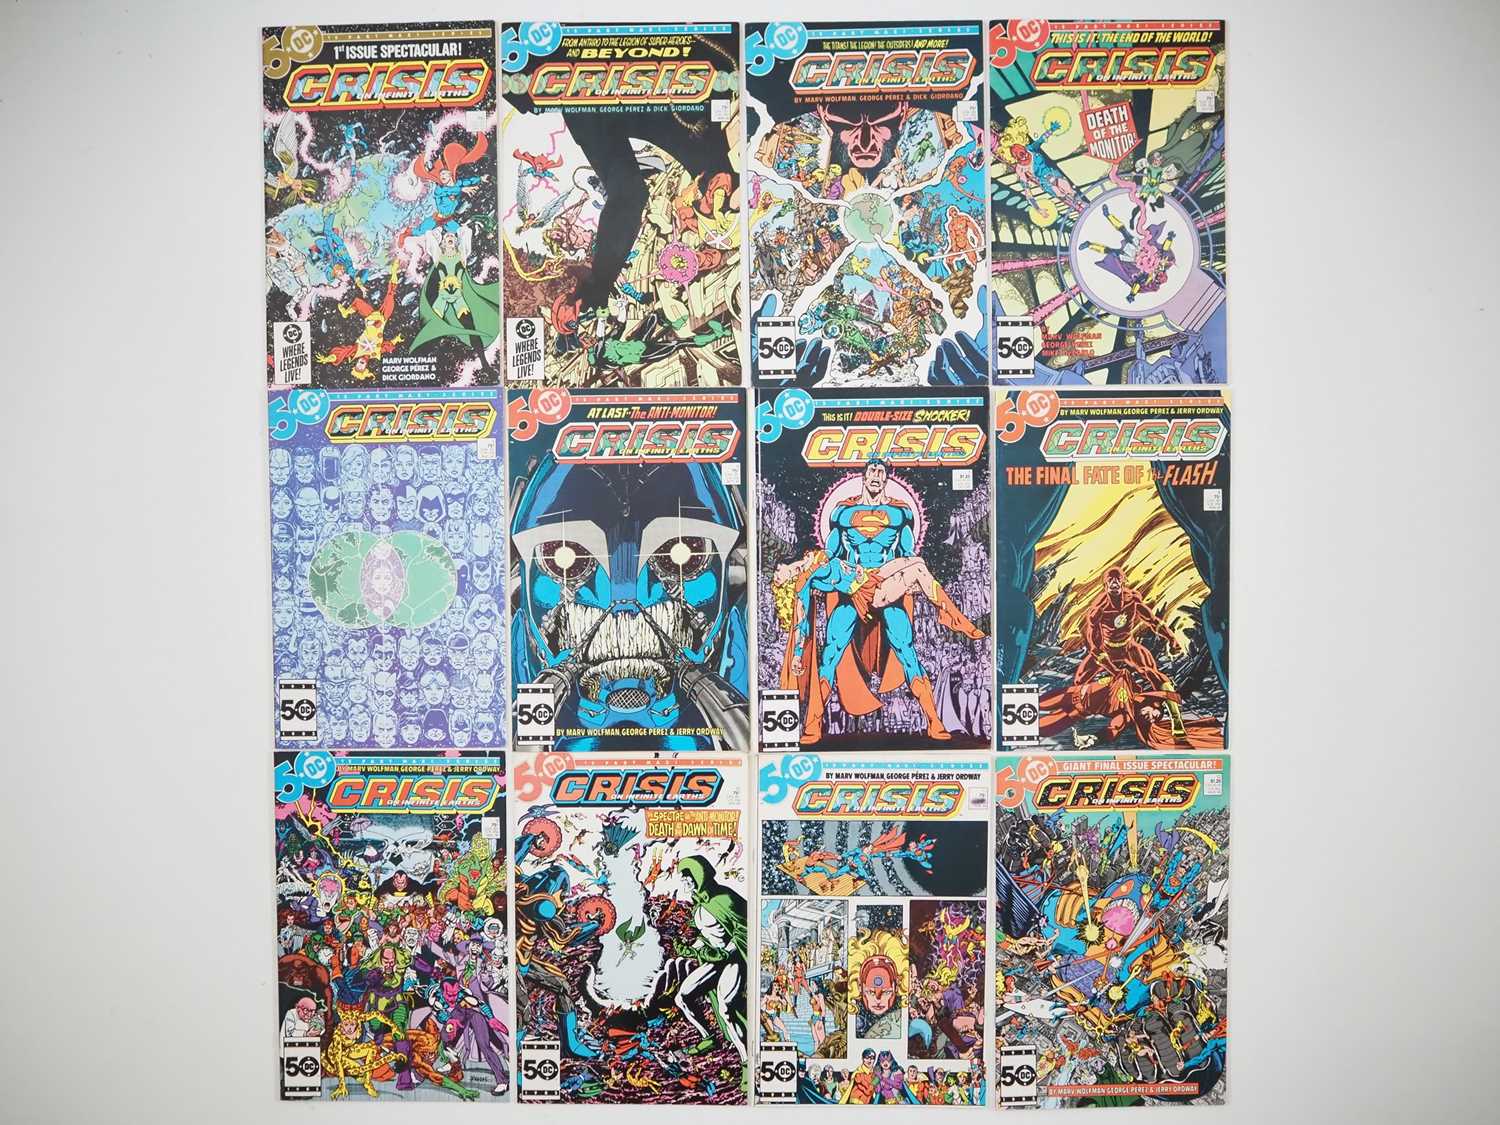 CRISIS ON INFINITE EARTHS # 1, 2, 3, 4, 5, 6, 7, 8, 9, 10, 11,12 (12 in Lot) - (1984/85 - DC) -